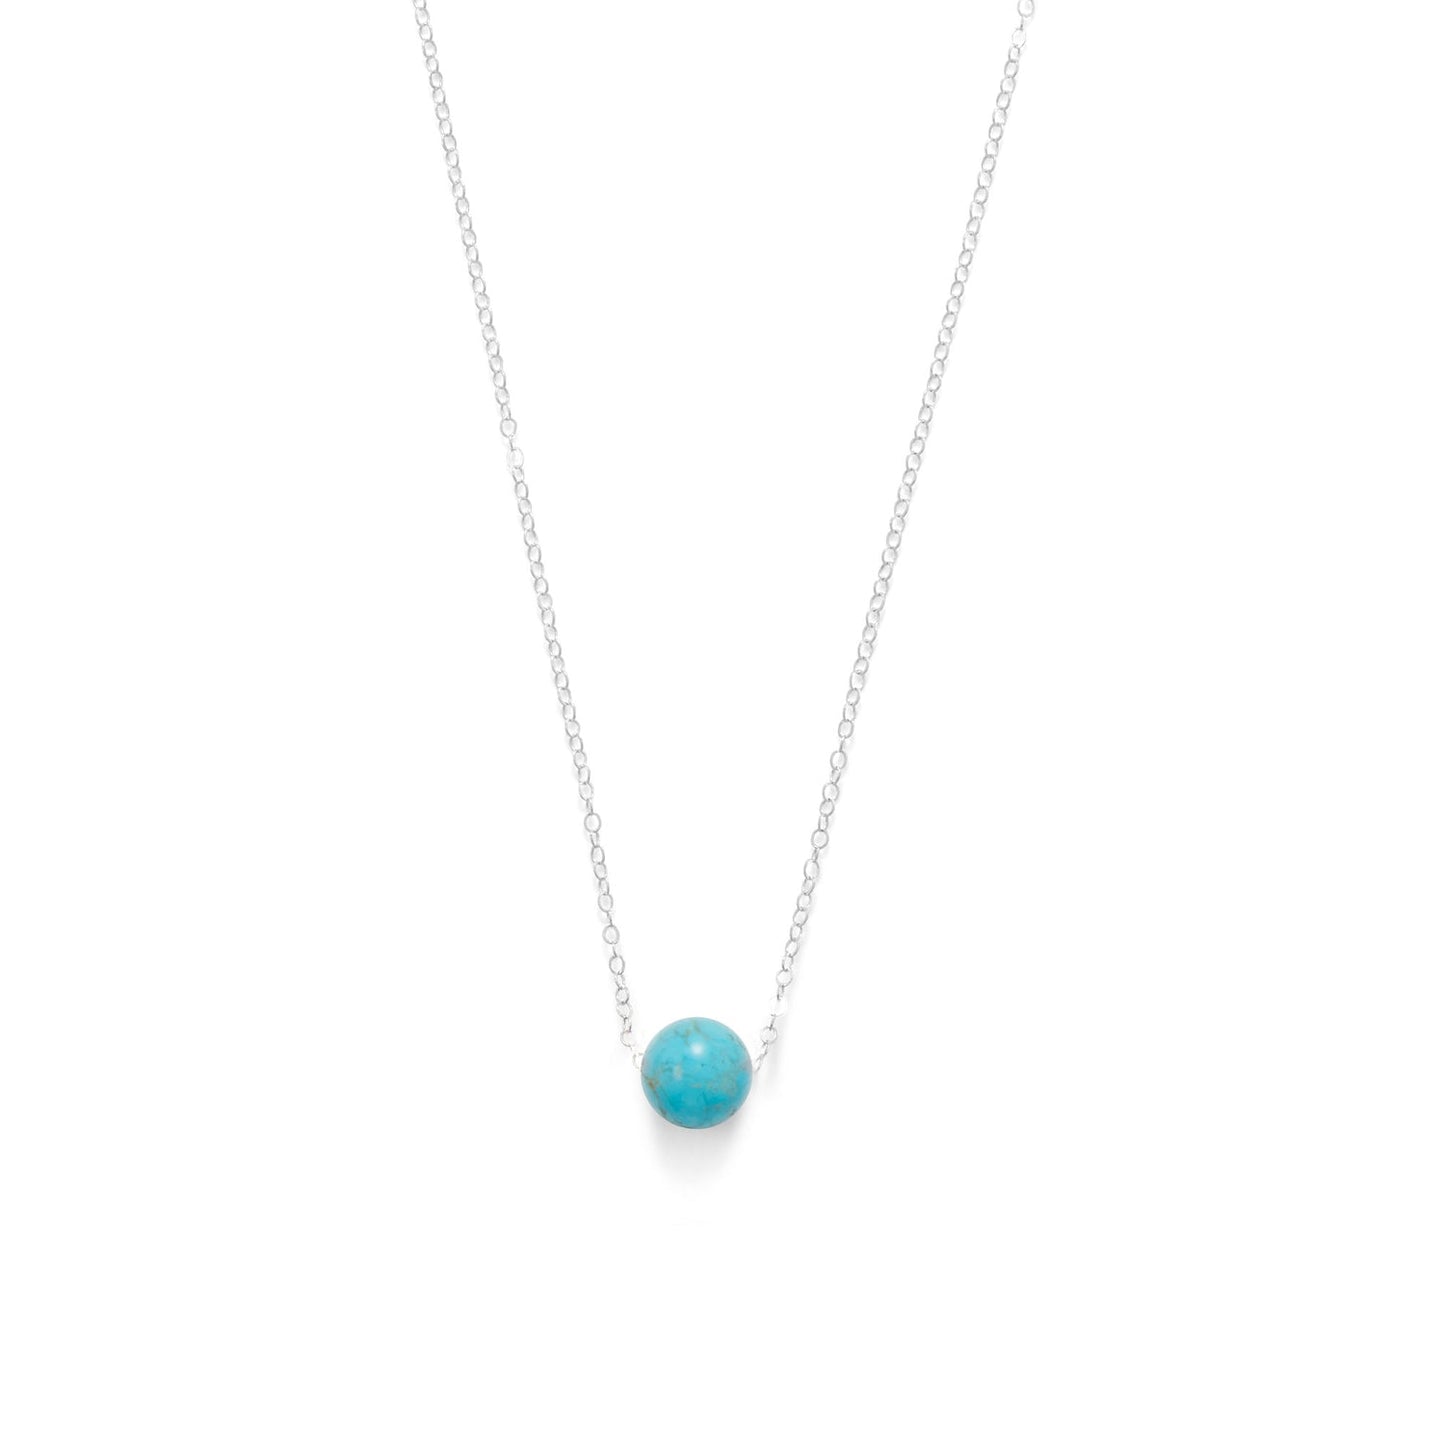 16" + 2" Floating Blue Magnesite Bead Necklace